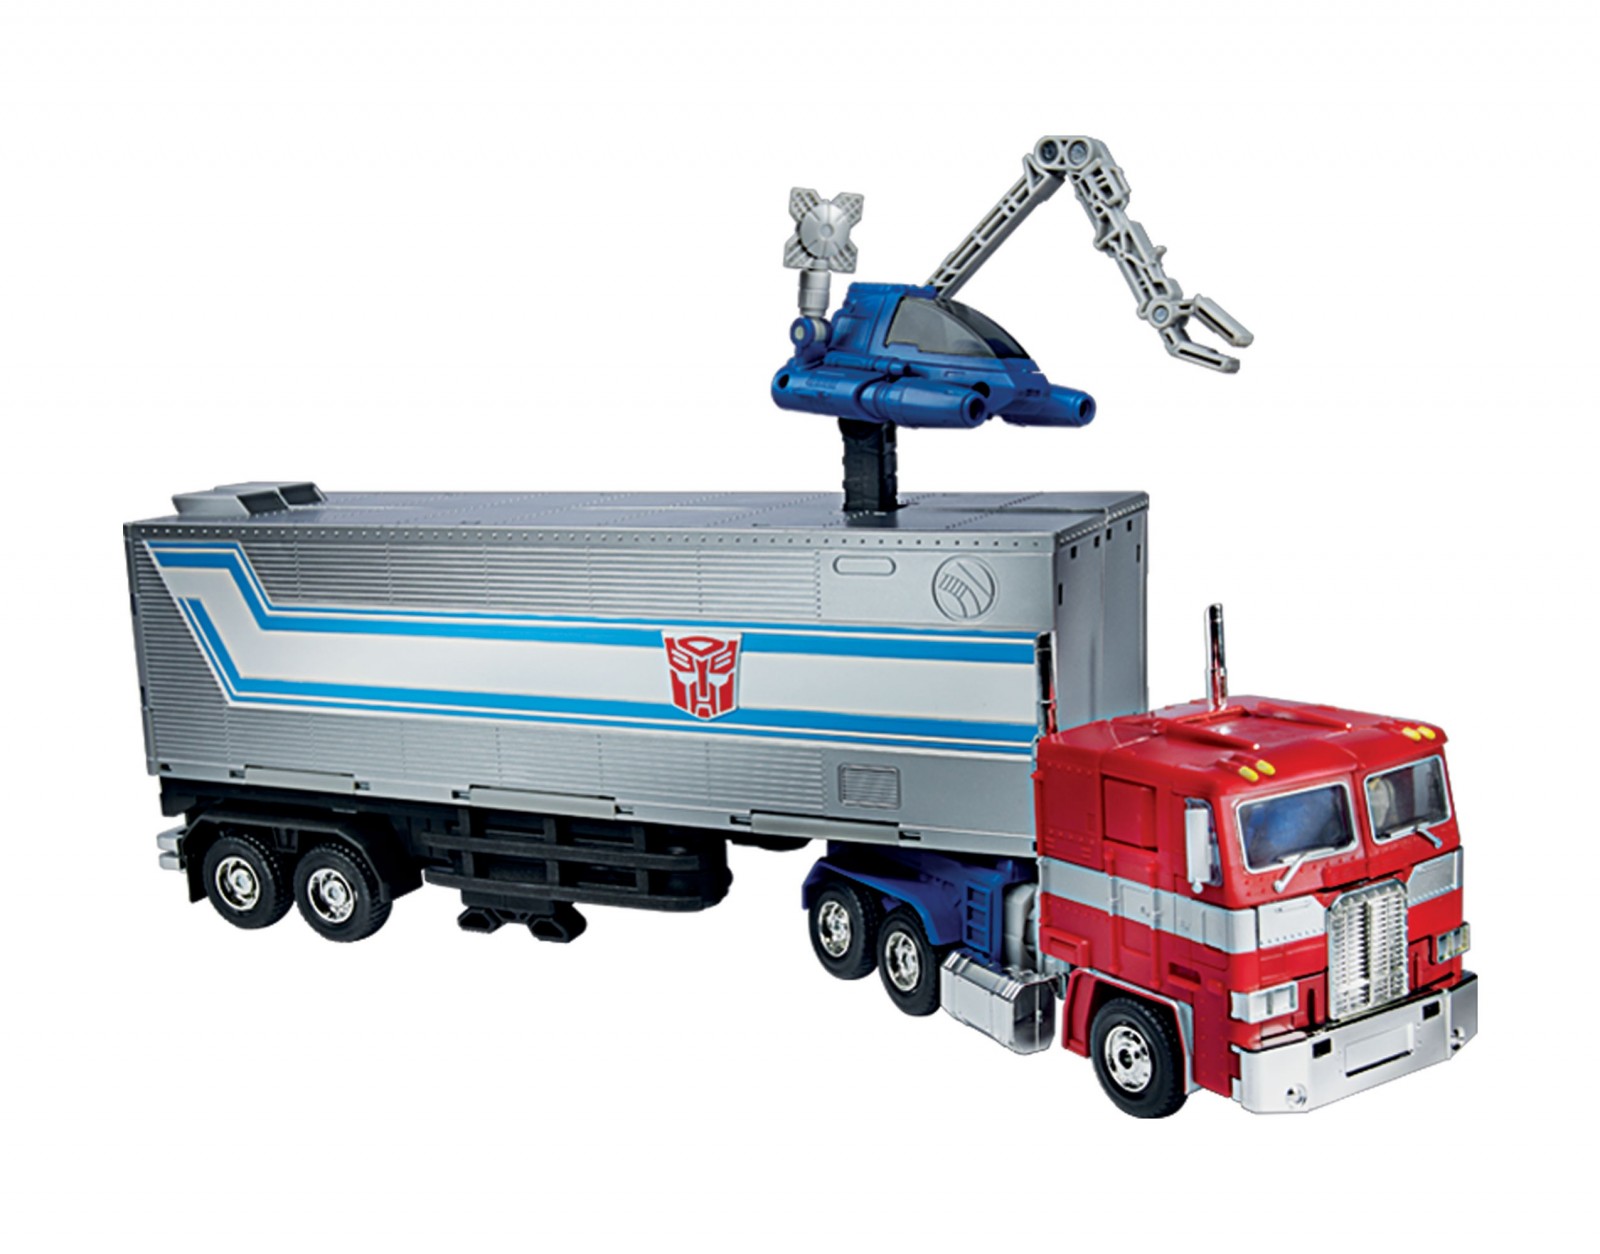 Transformers News: Here's where Hasbro's Masterpiece Optimus Prime will be available